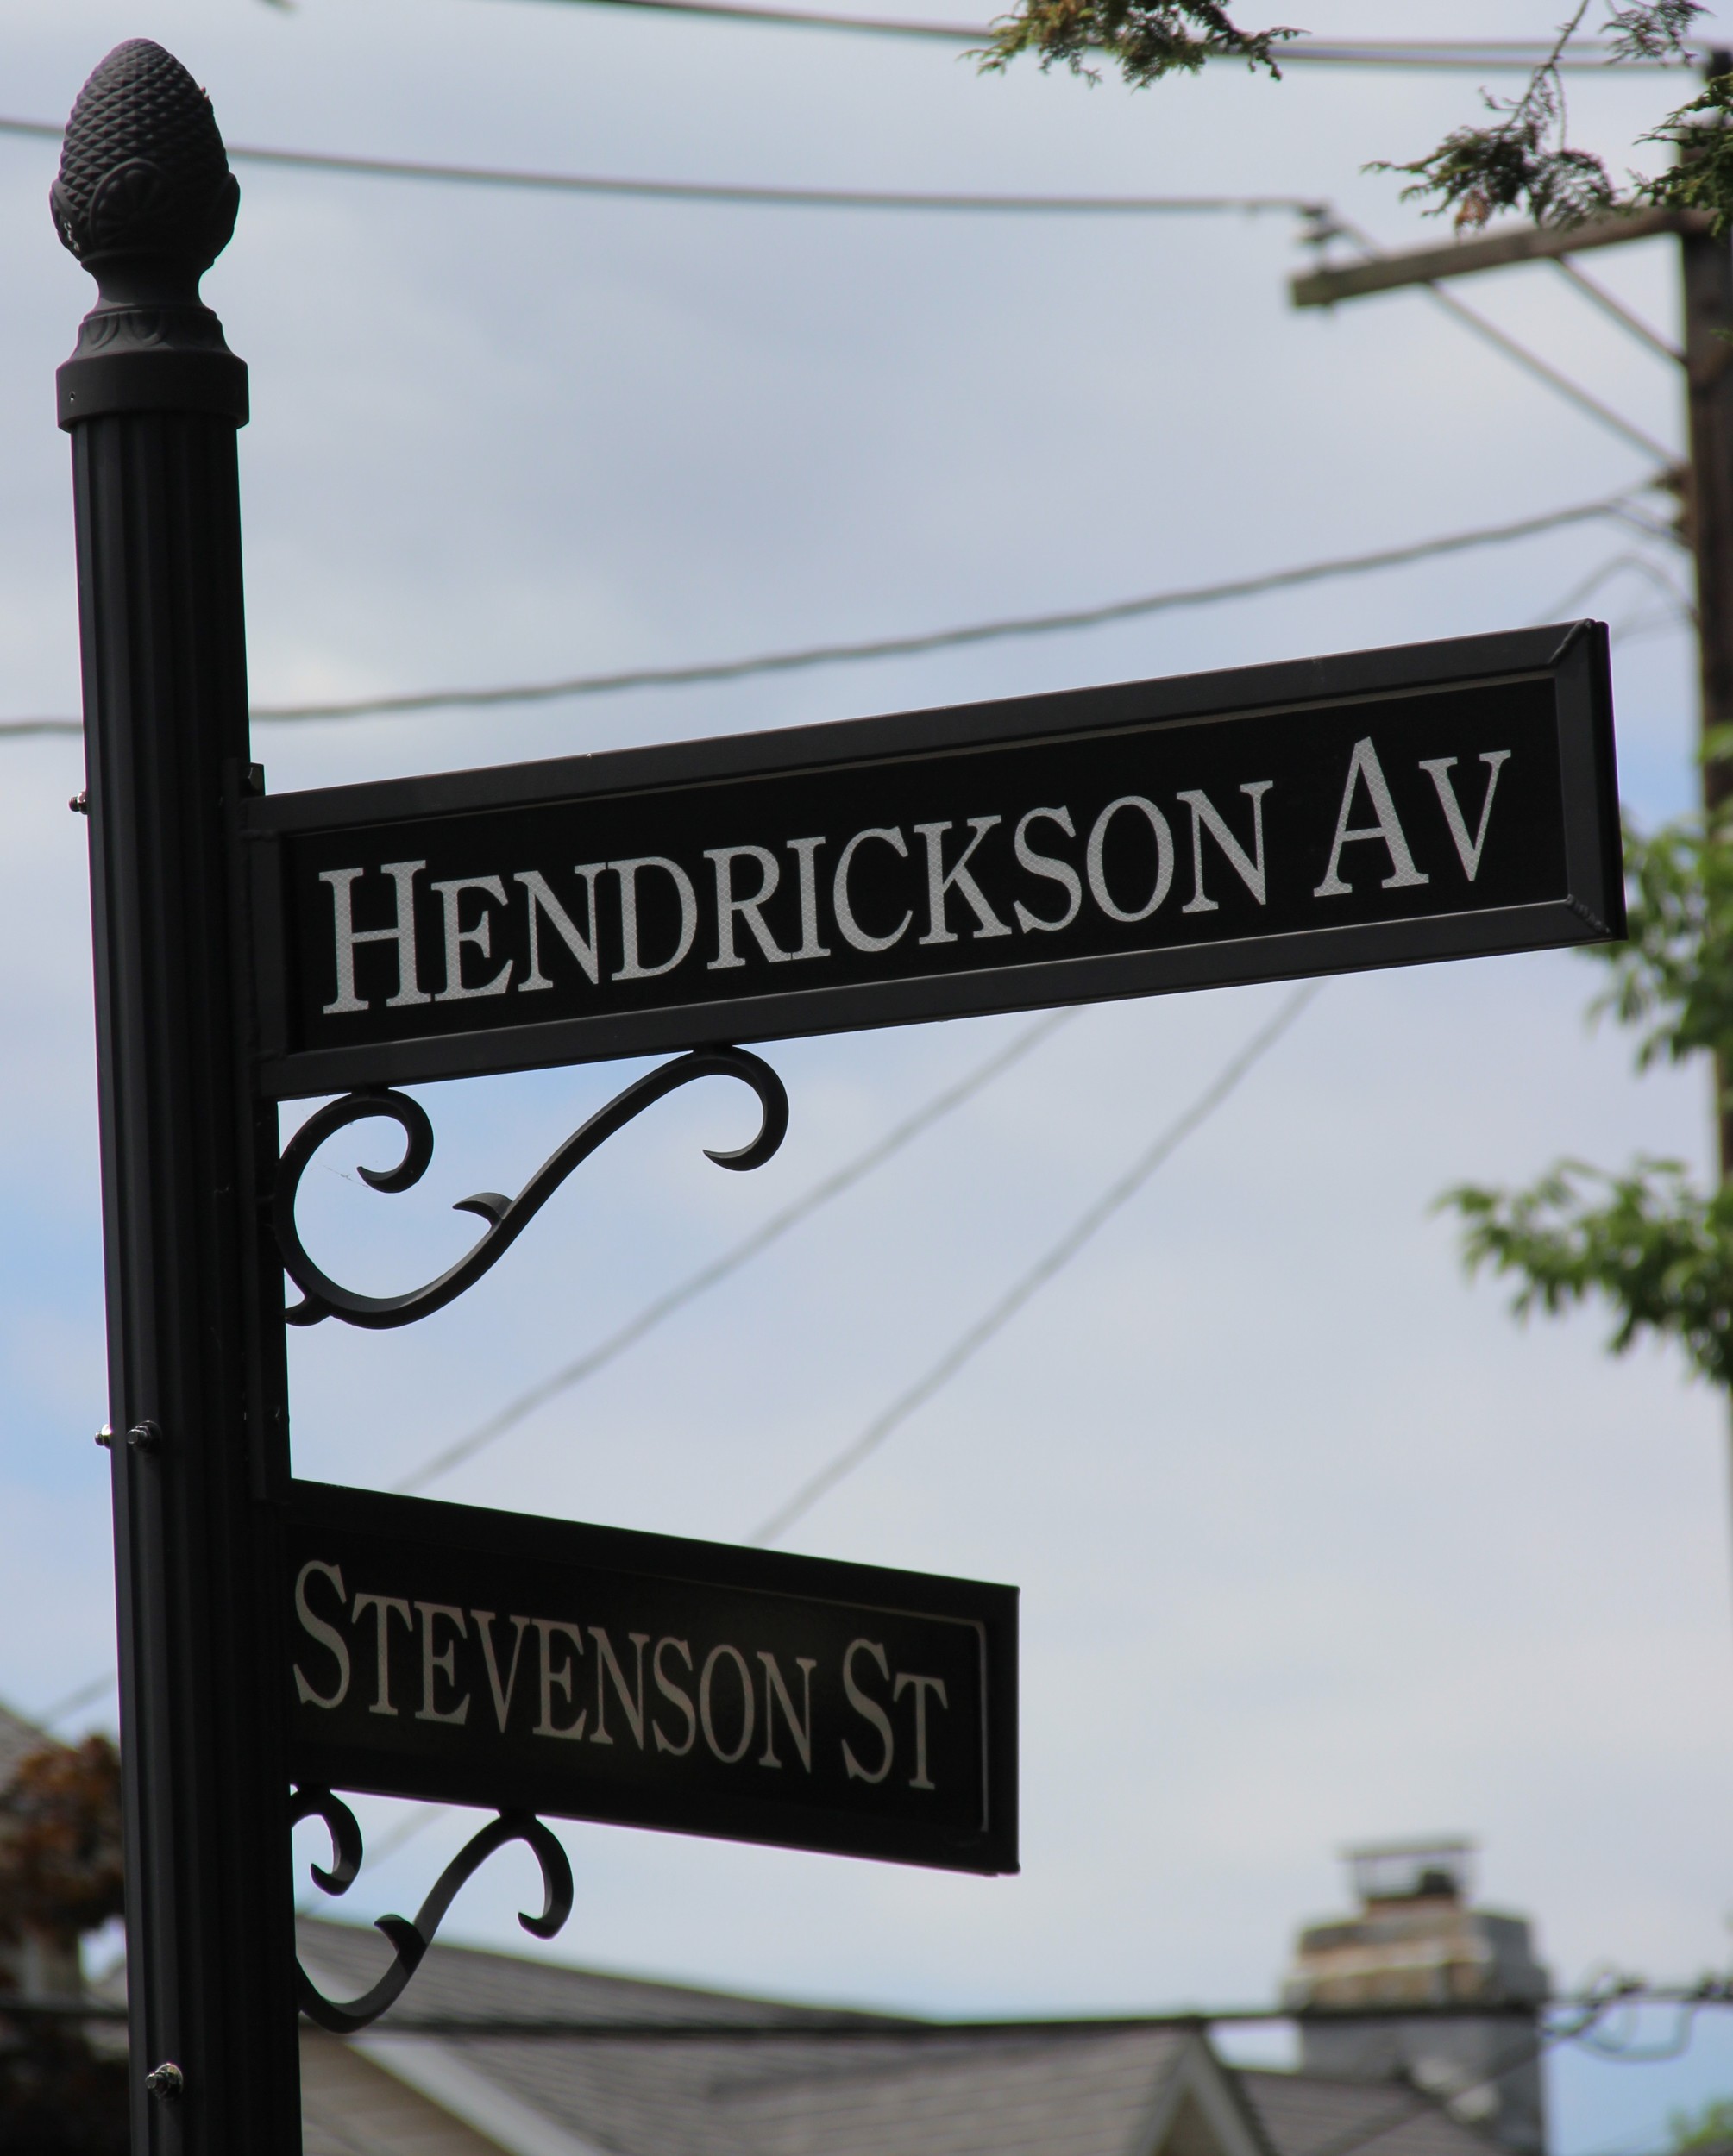 The Village of Lynbrook will implement new, ornate street signs over the course of the next three years, to improve the look of the community.